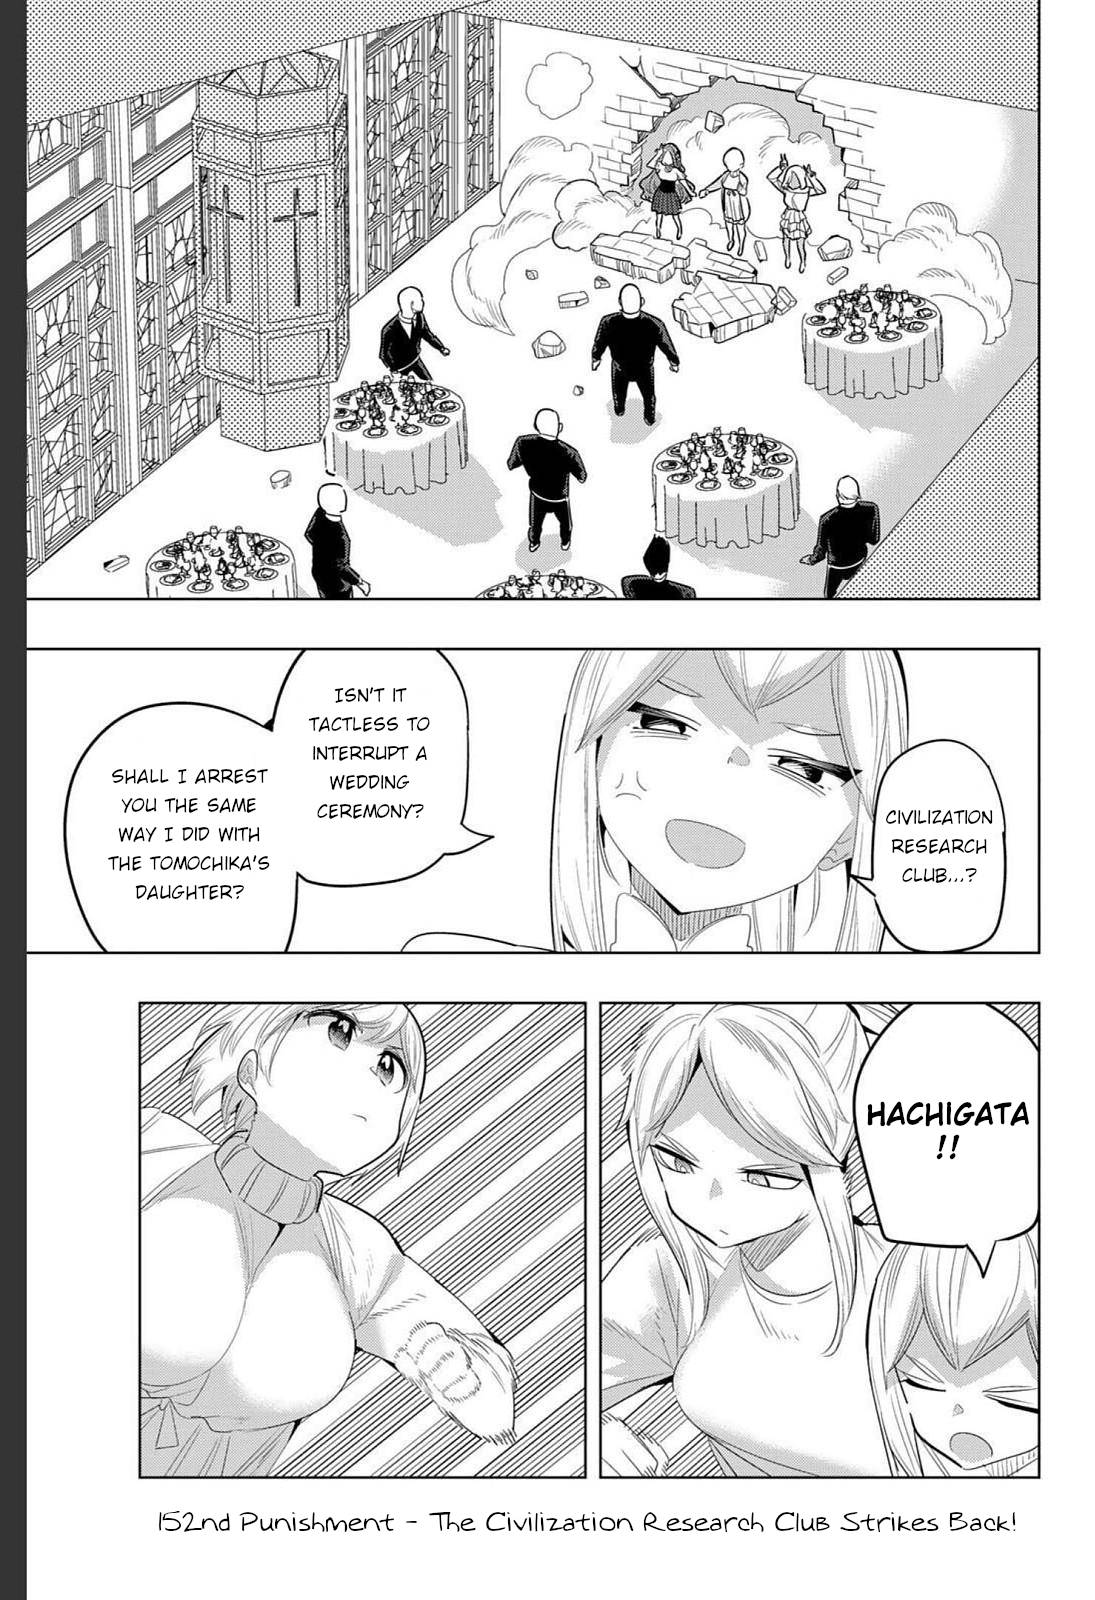 The Quintessential Quintuplets, Chapter 111 - English Scans